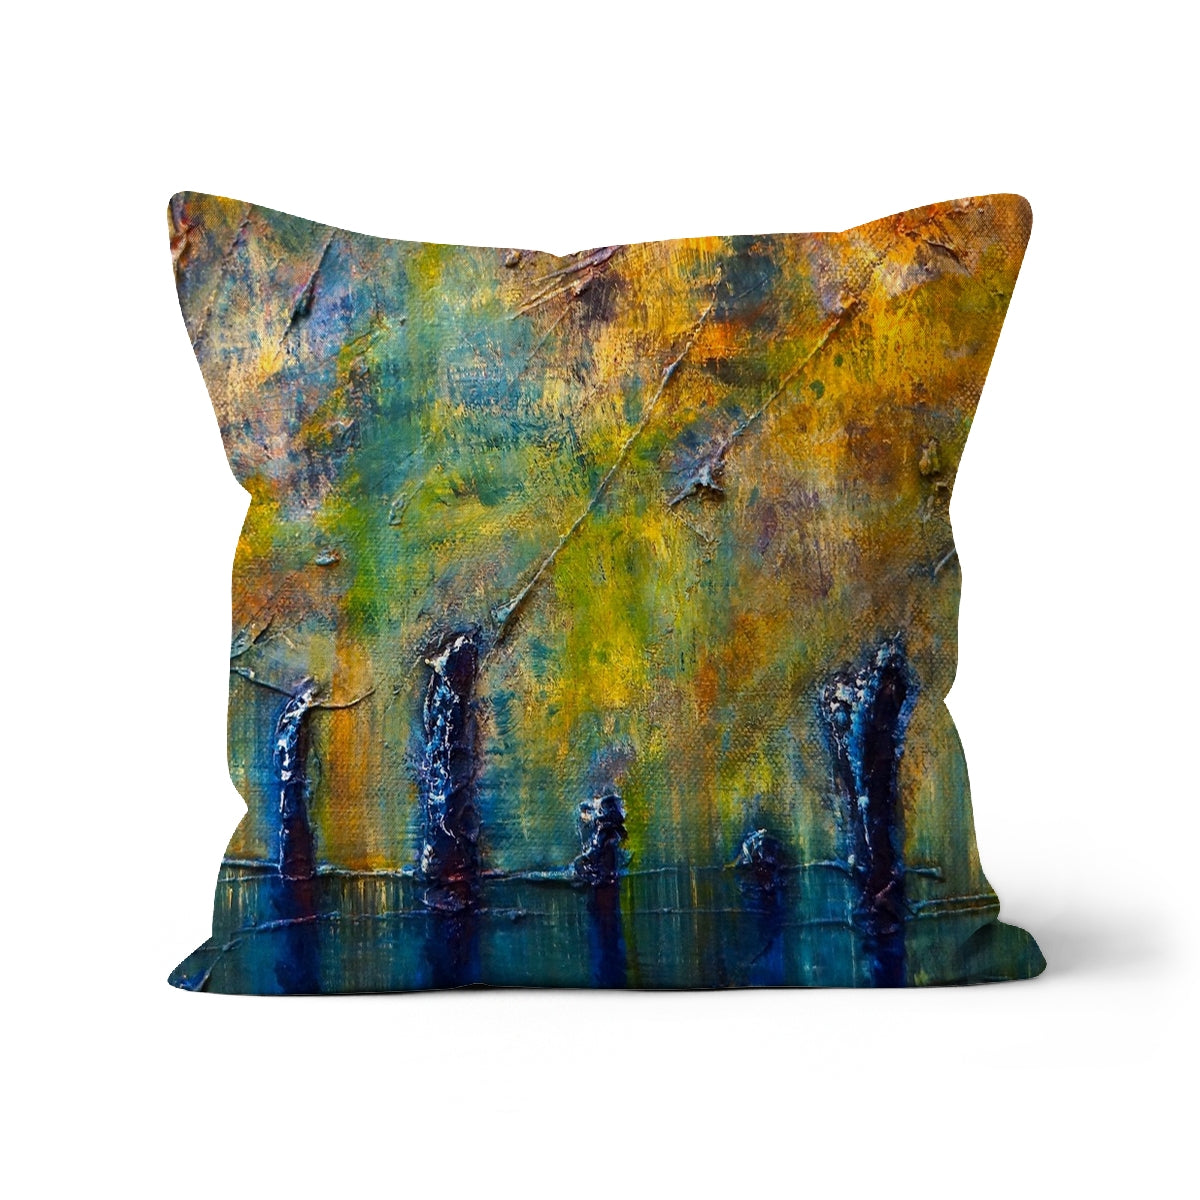 Stenness Moonlight Orkney Art Gifts Cushion-Cushions-Orkney Art Gallery-Linen-24"x24"-Paintings, Prints, Homeware, Art Gifts From Scotland By Scottish Artist Kevin Hunter